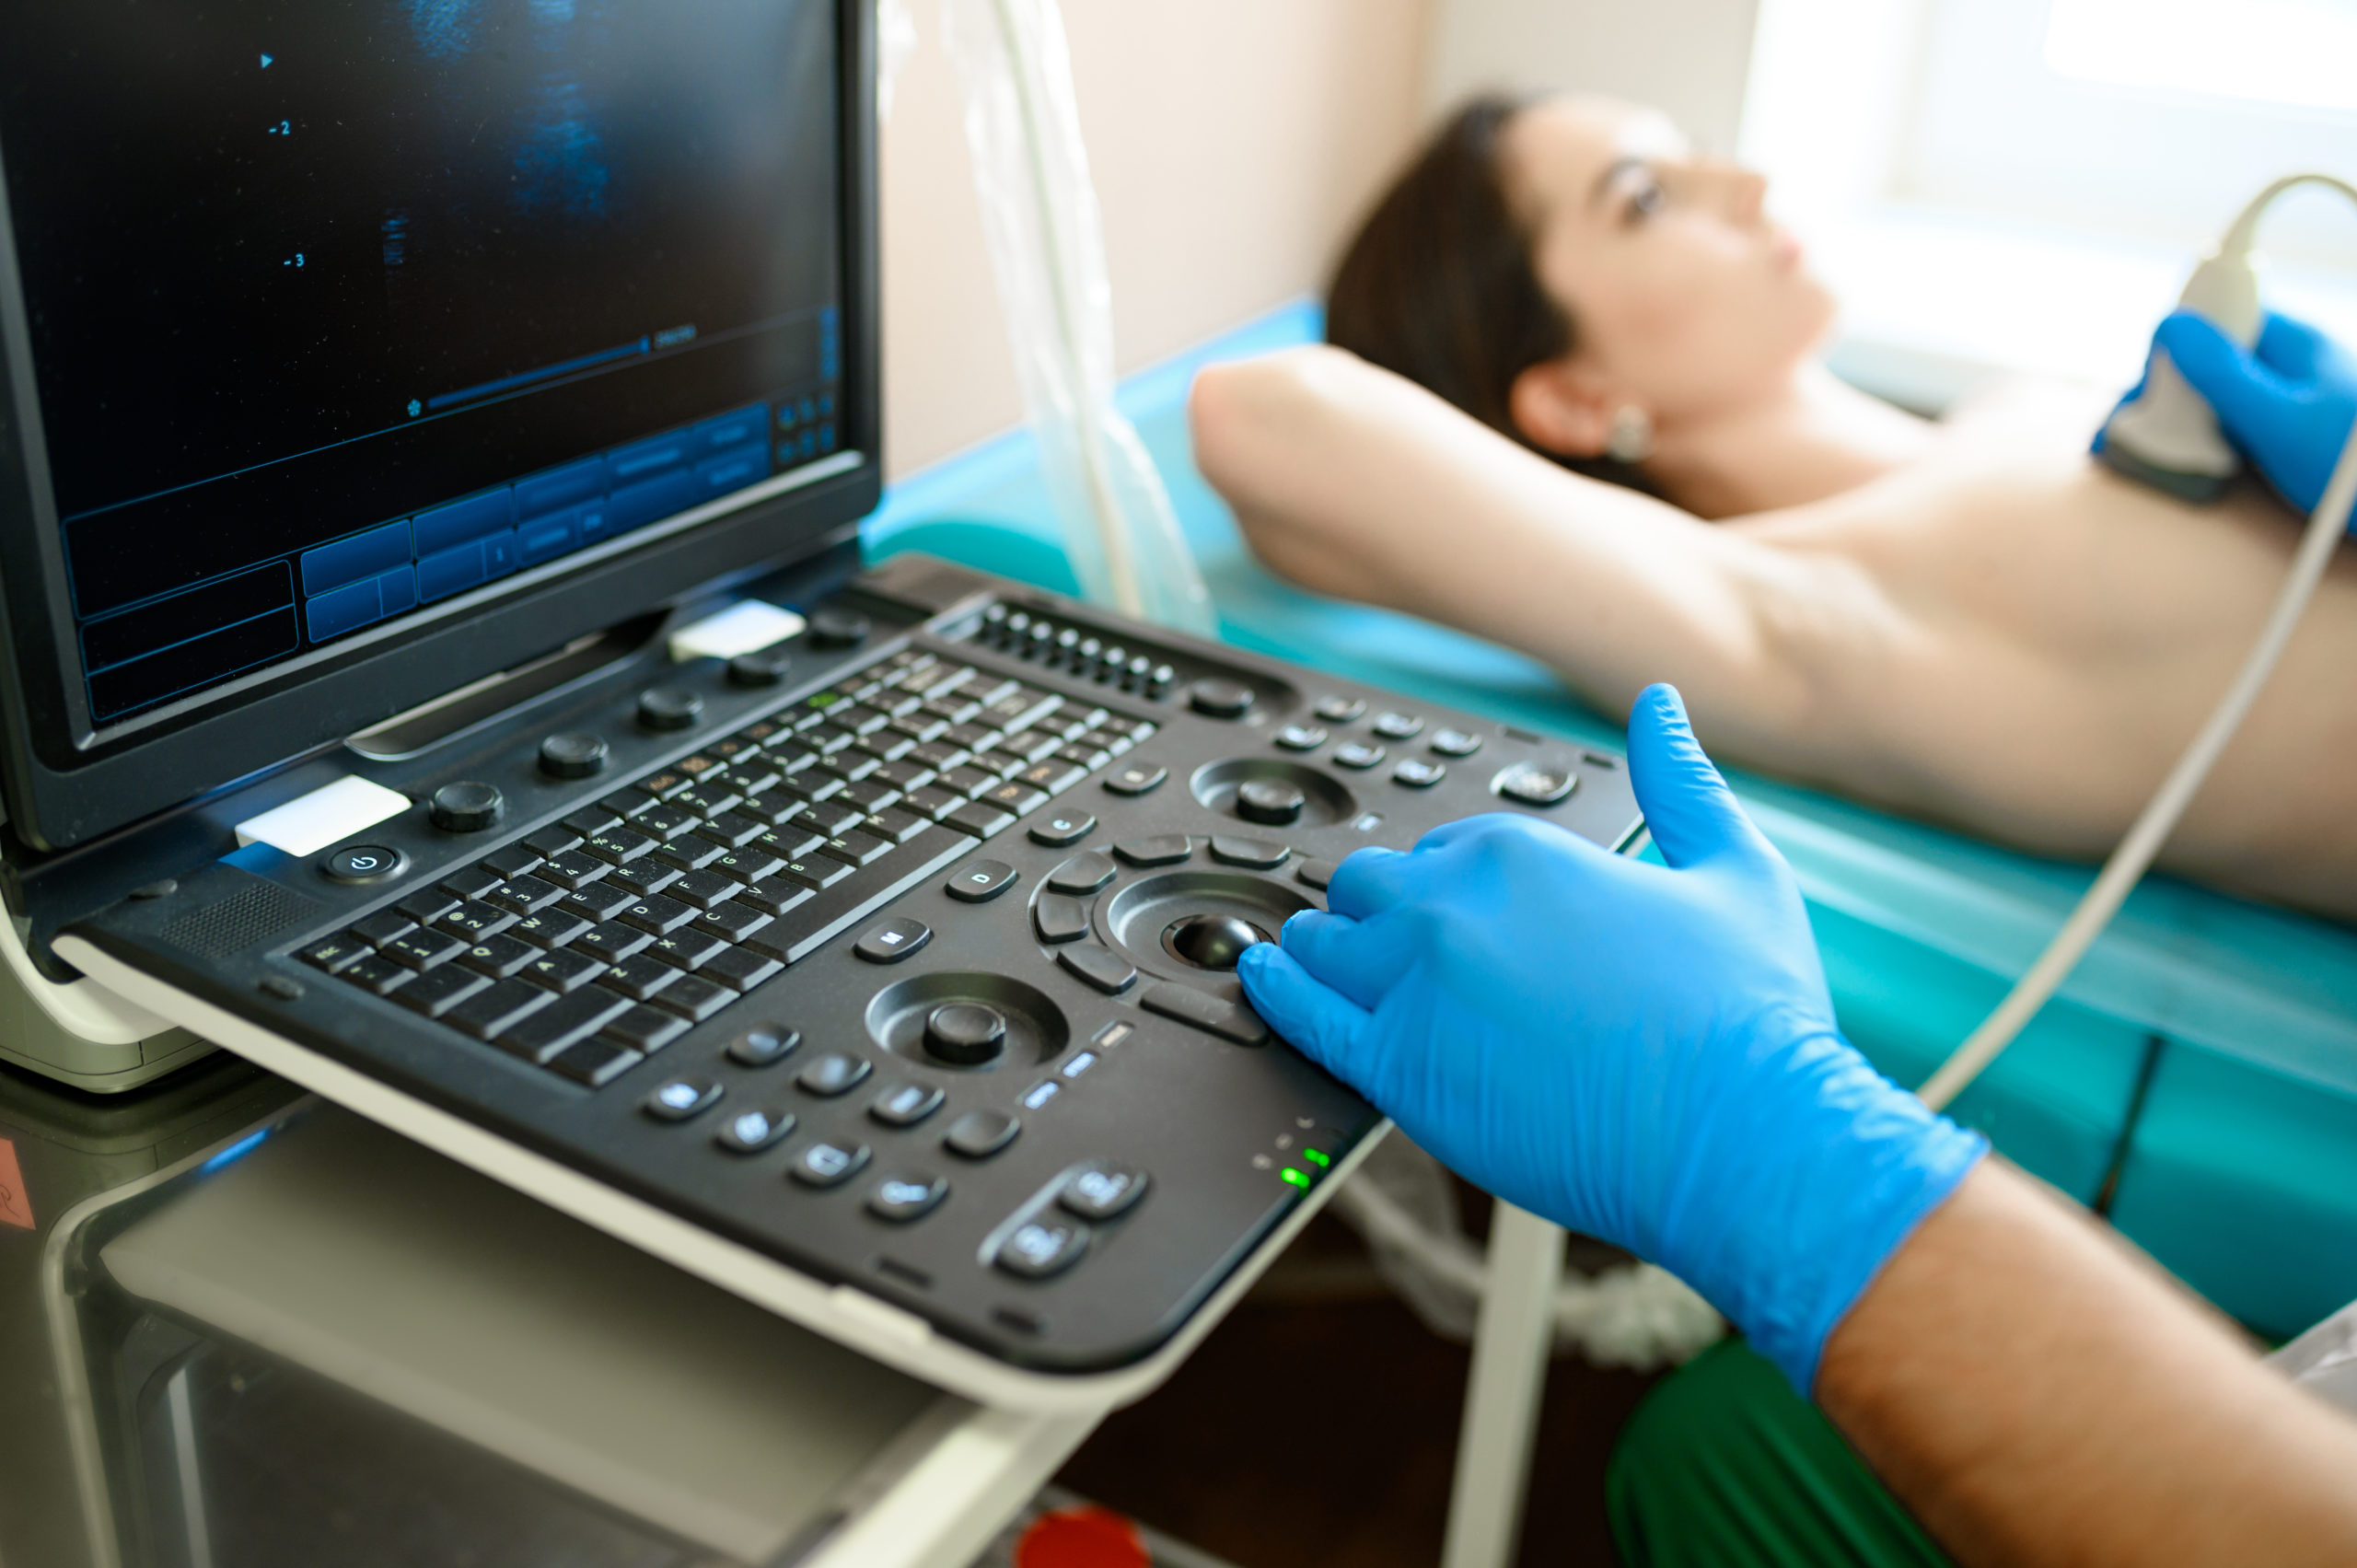 Supplemental Breast Cancer-Screening Ultrasonography For Dense Breasts